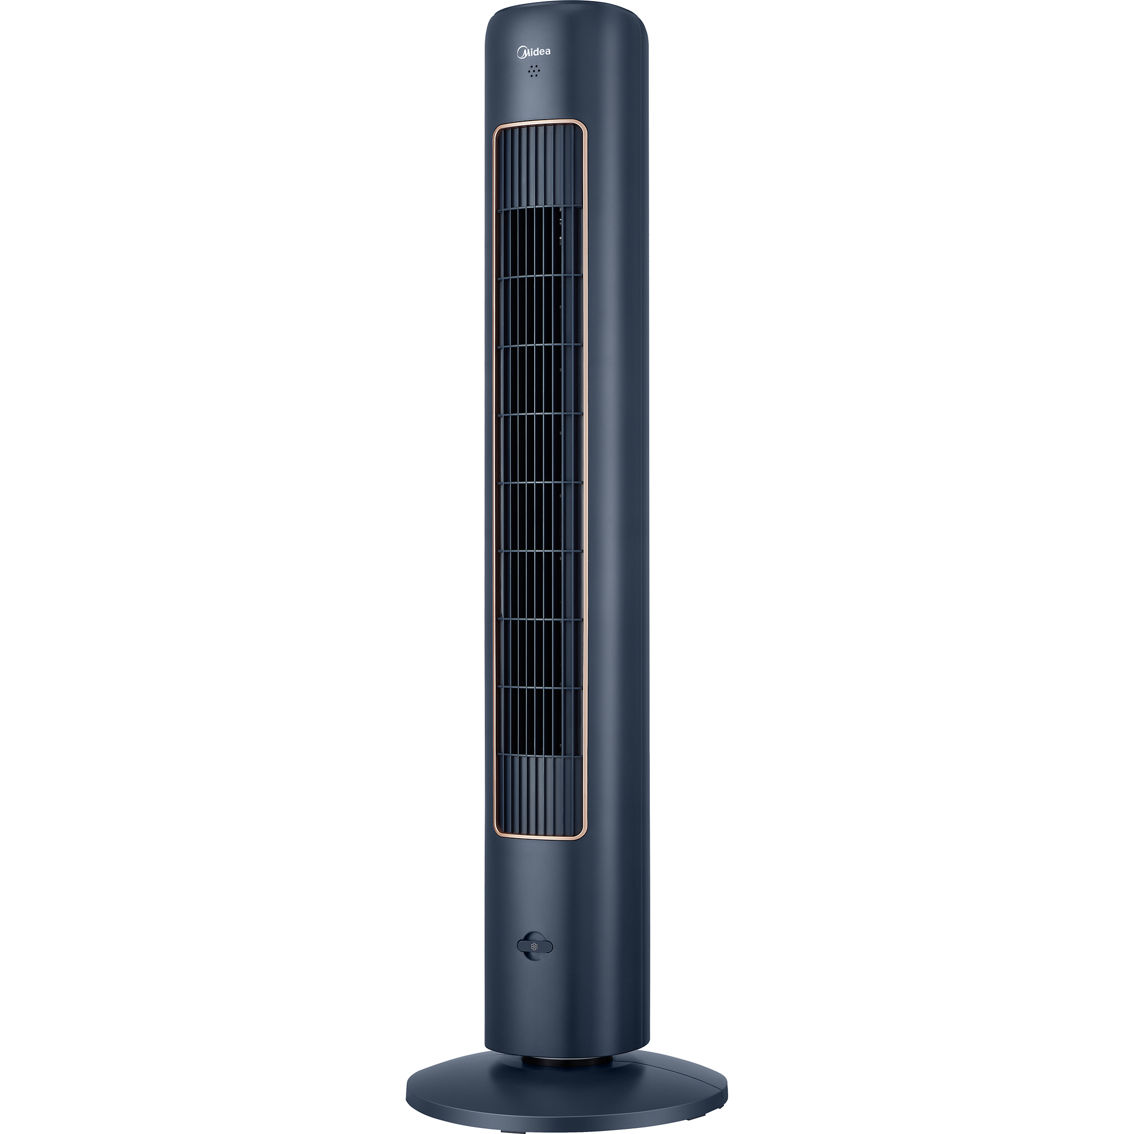 Midea 42 in. Wi-Fi enabled Oscillating Tower Fan - Image 3 of 6